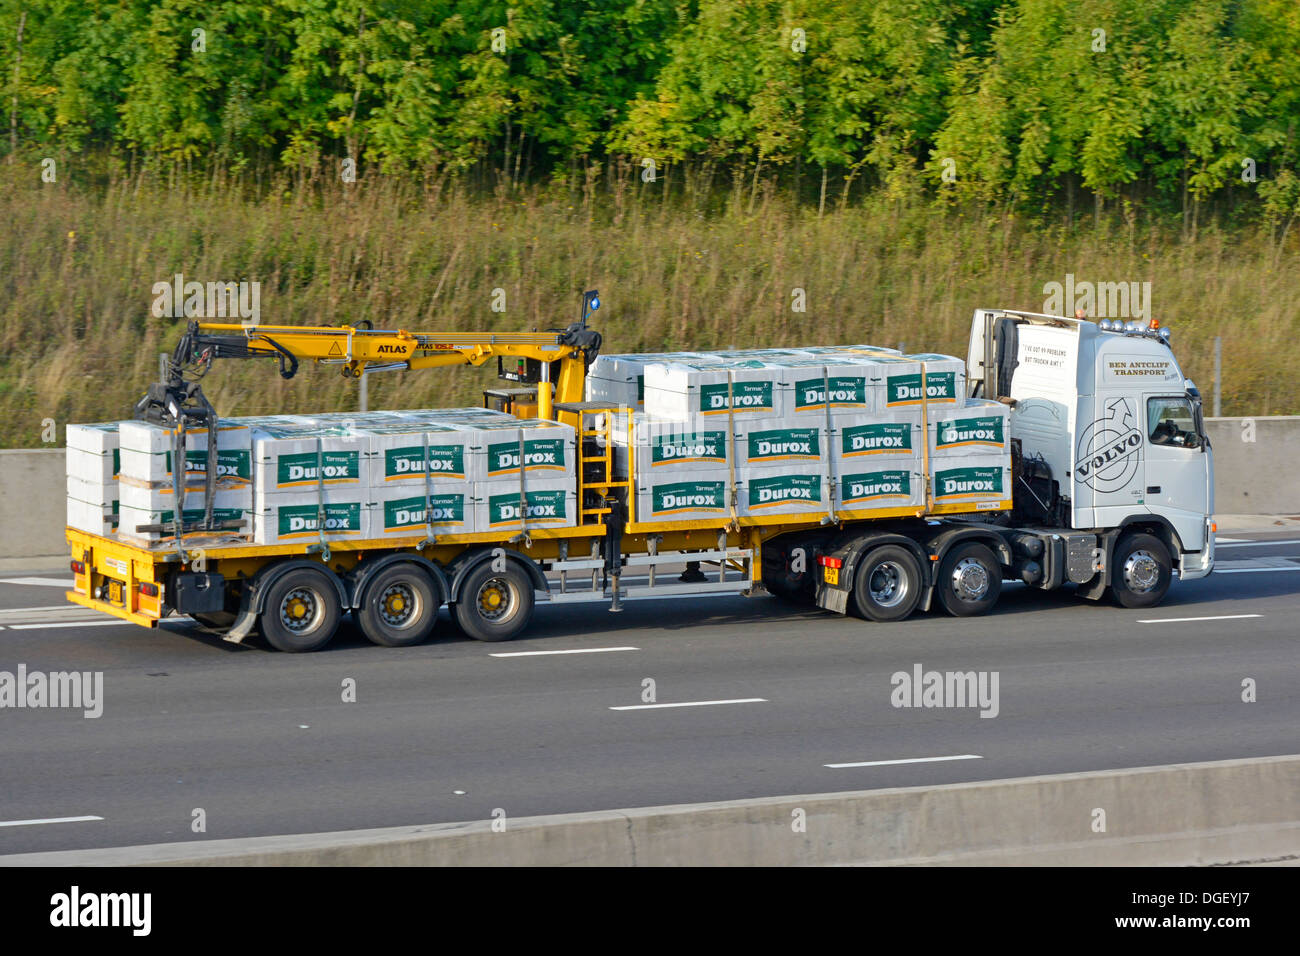 Volvo truck with Atlas crane offload articulated trailer loaded with Durox building blocks for the construction industry Stock Photo